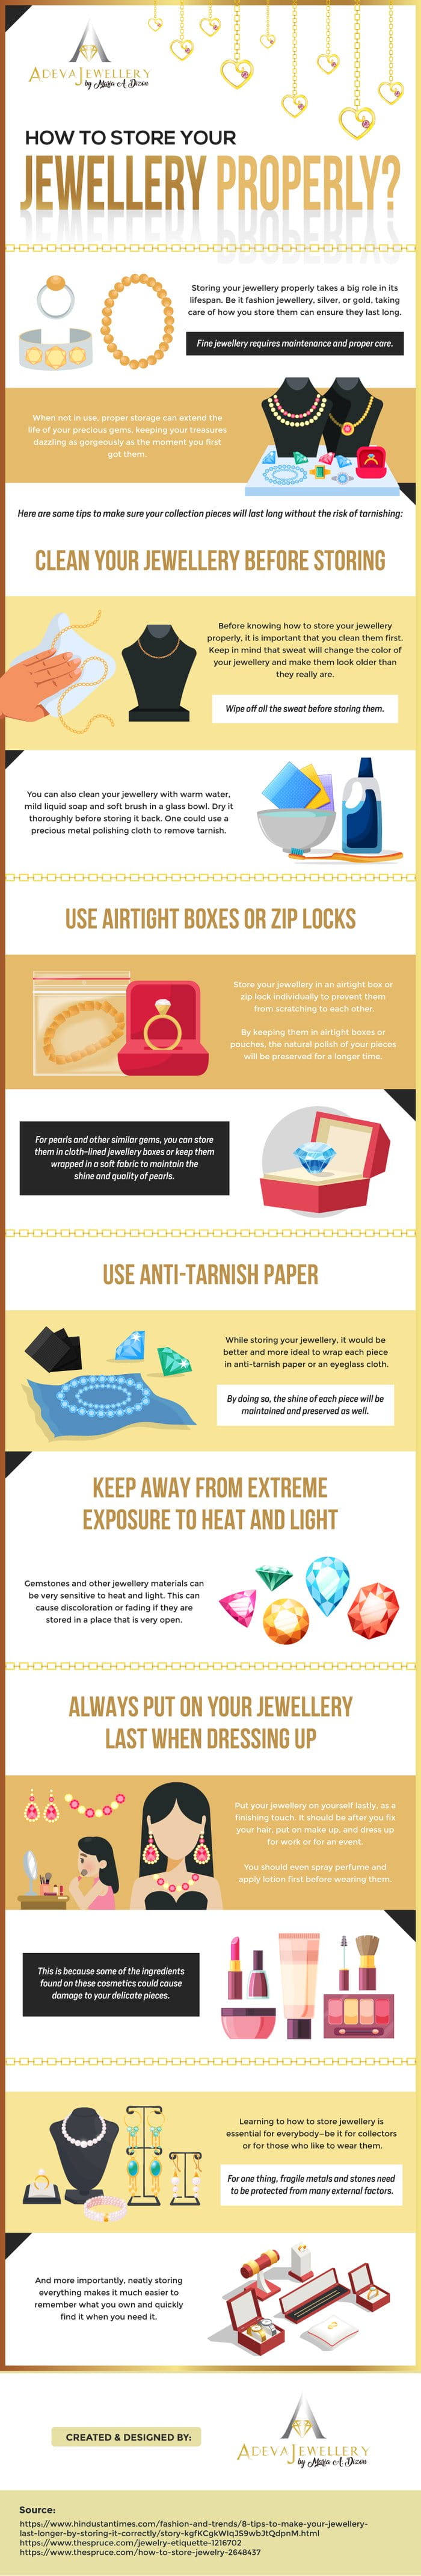 How to Store Your Jewellery Properly – Infographic